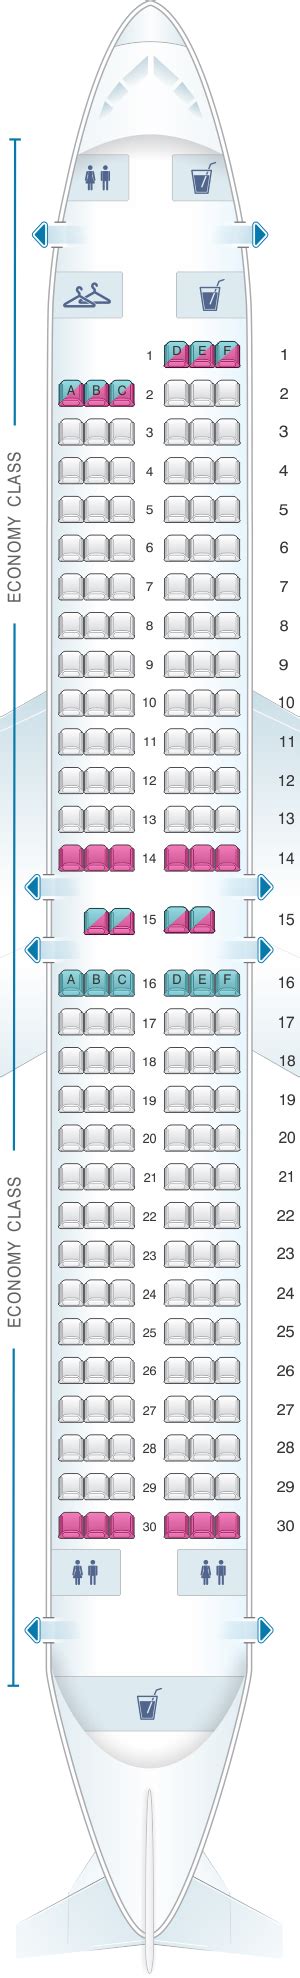 boeing 737 max 8 seating chart southwest